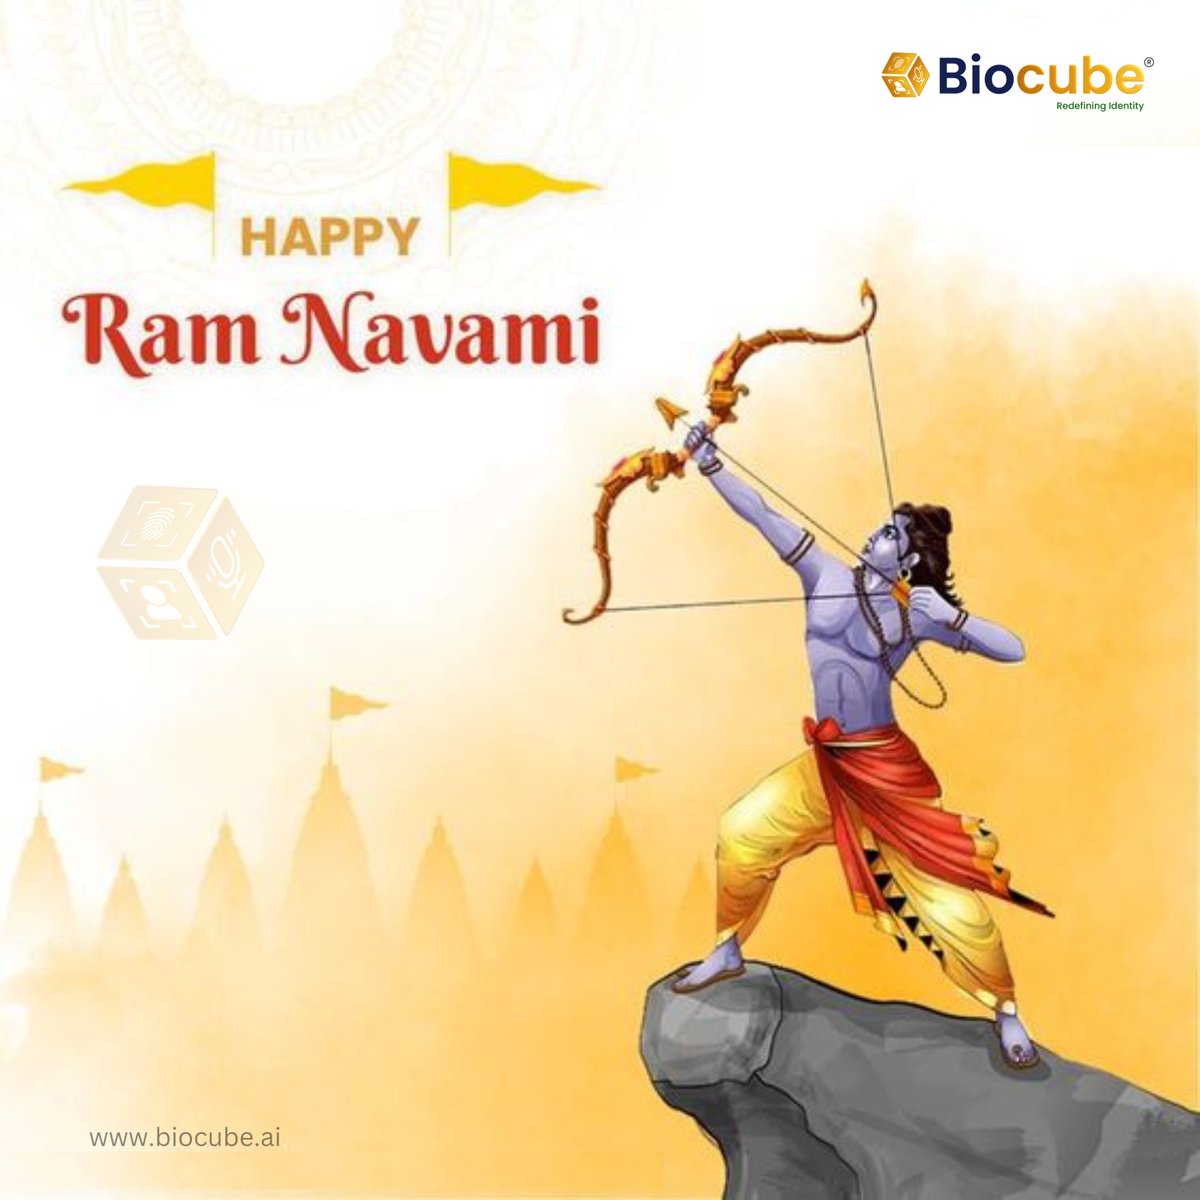 This Ram Navami, discover divine security with @Biocube_AI, Introducing #AI-powered, #multifactor, #multimodal, decentralized bio-id & #livedataanalytics platform. Just as Lord #Rama protects & guides, #Biocube safeguards your #digitalidentity across realms. 
Happy Ram Navami 🙏